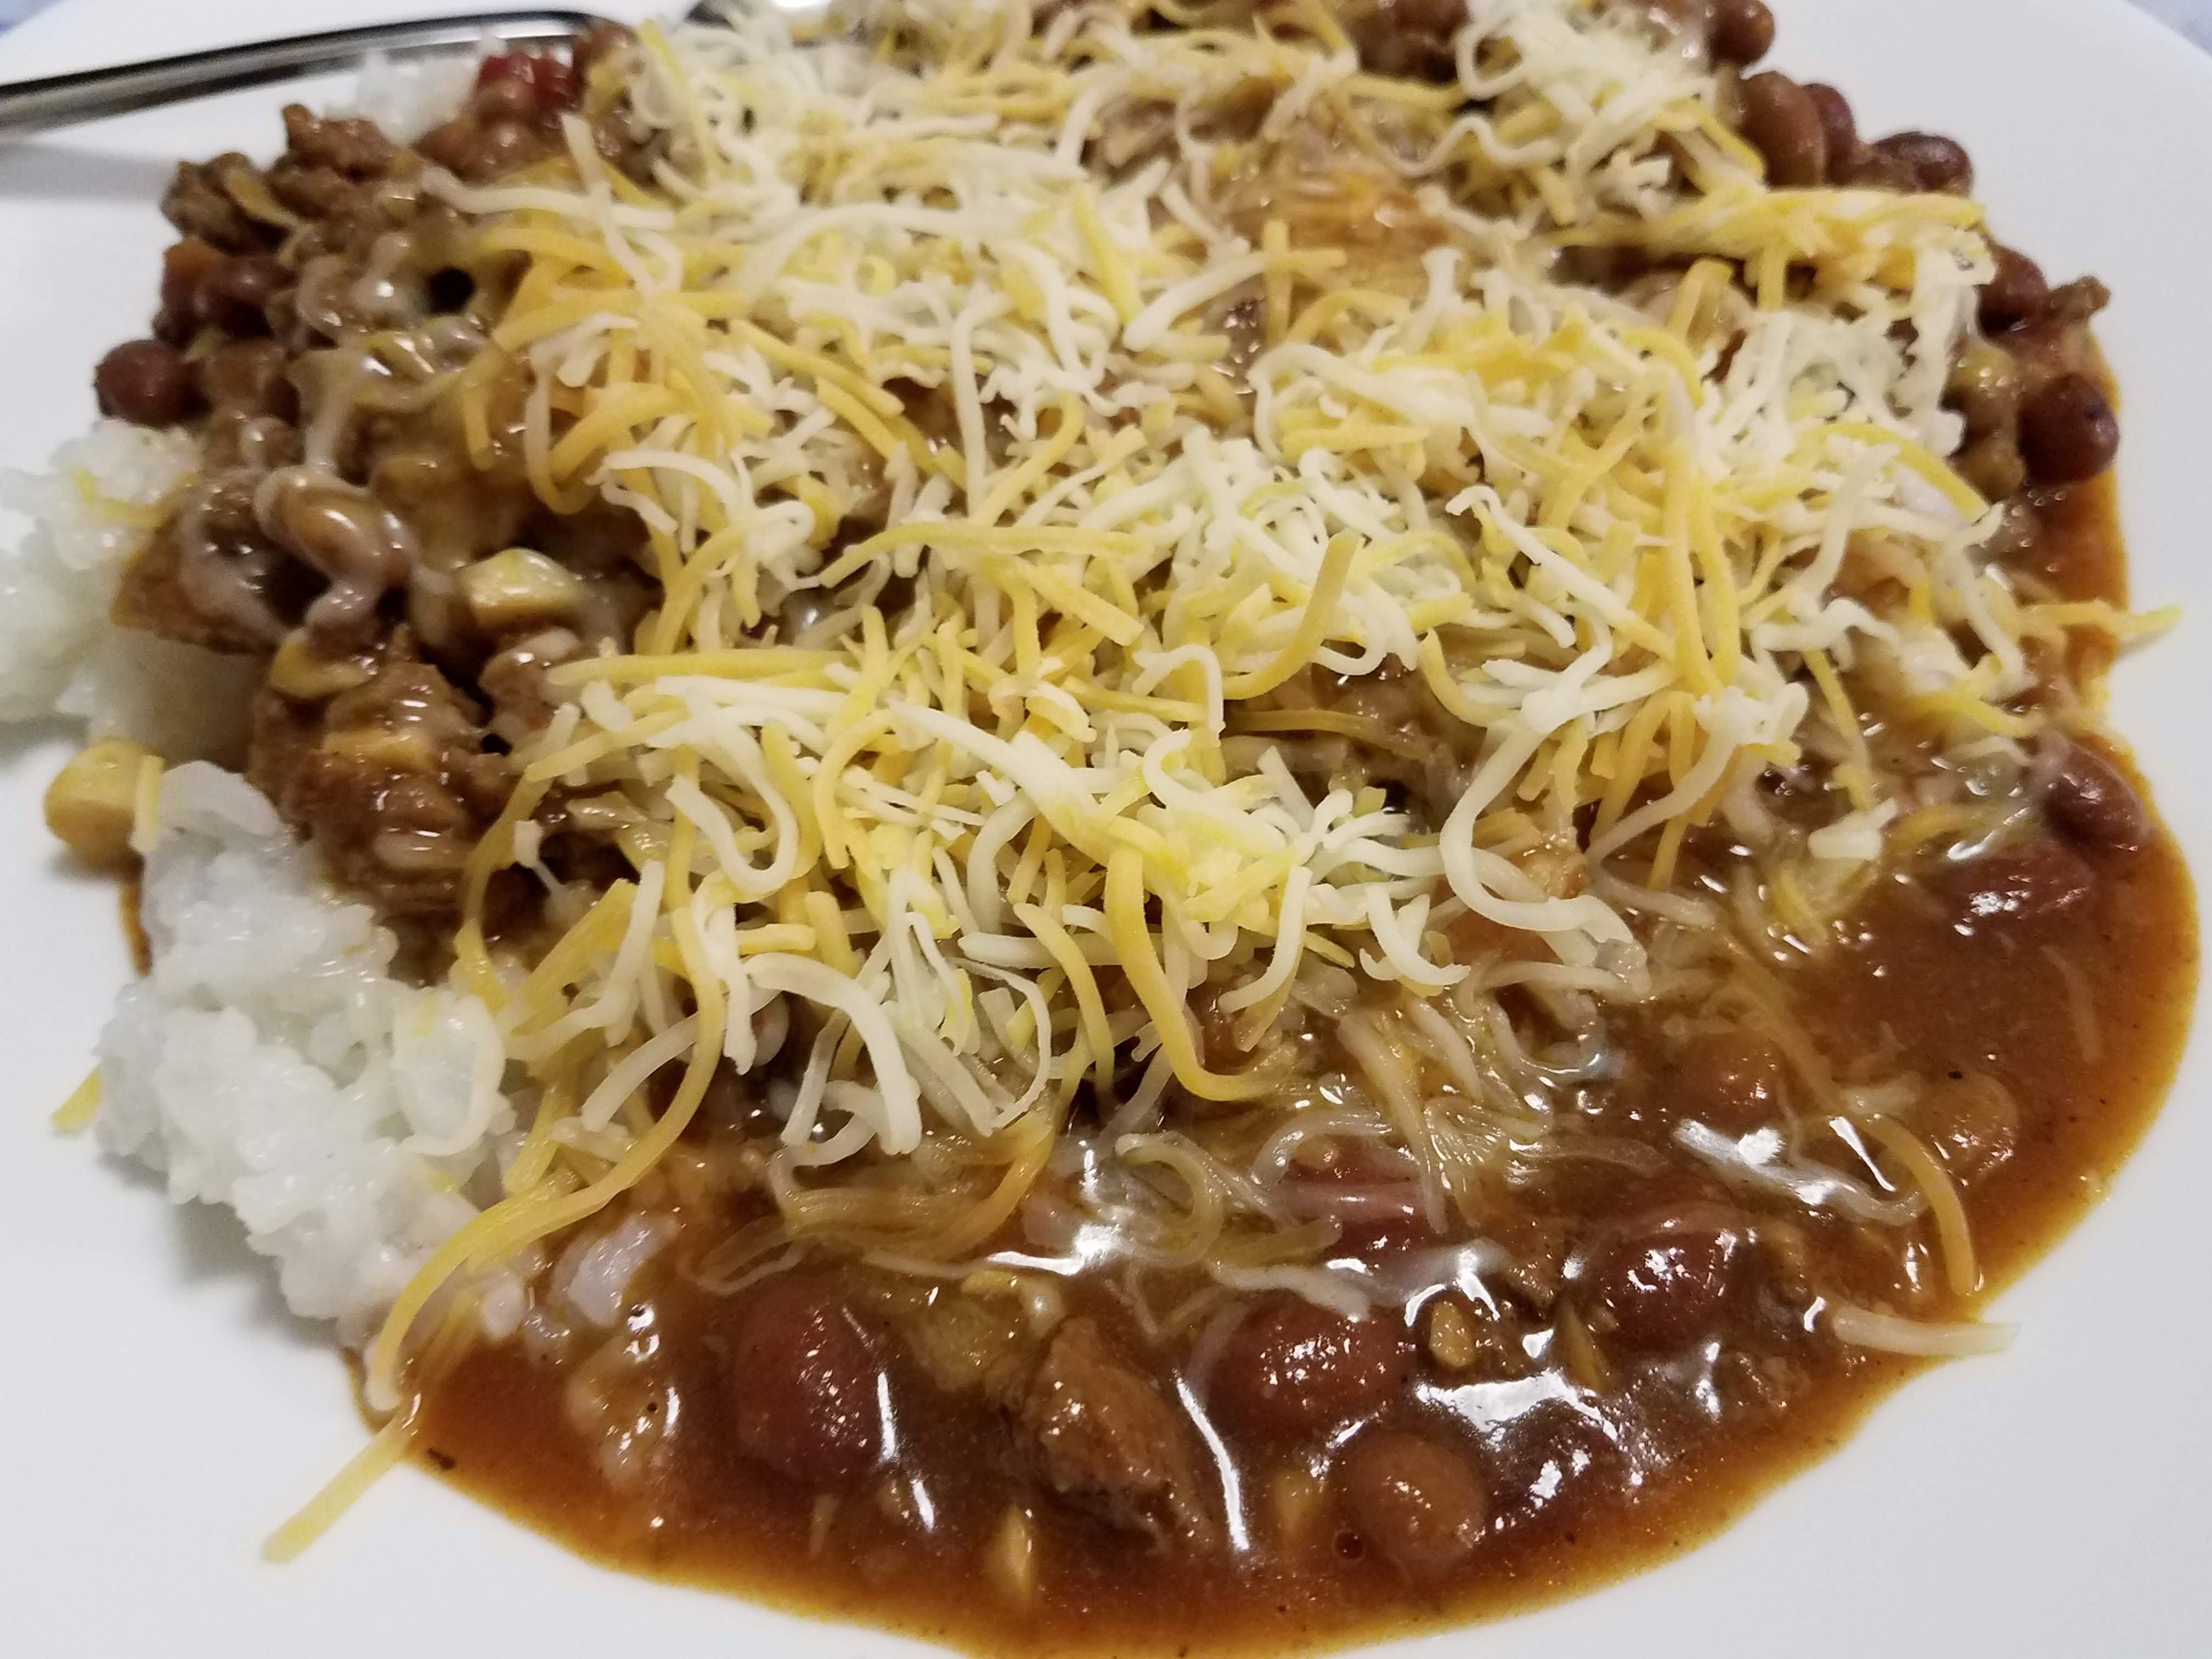 Chili with rice and cheese